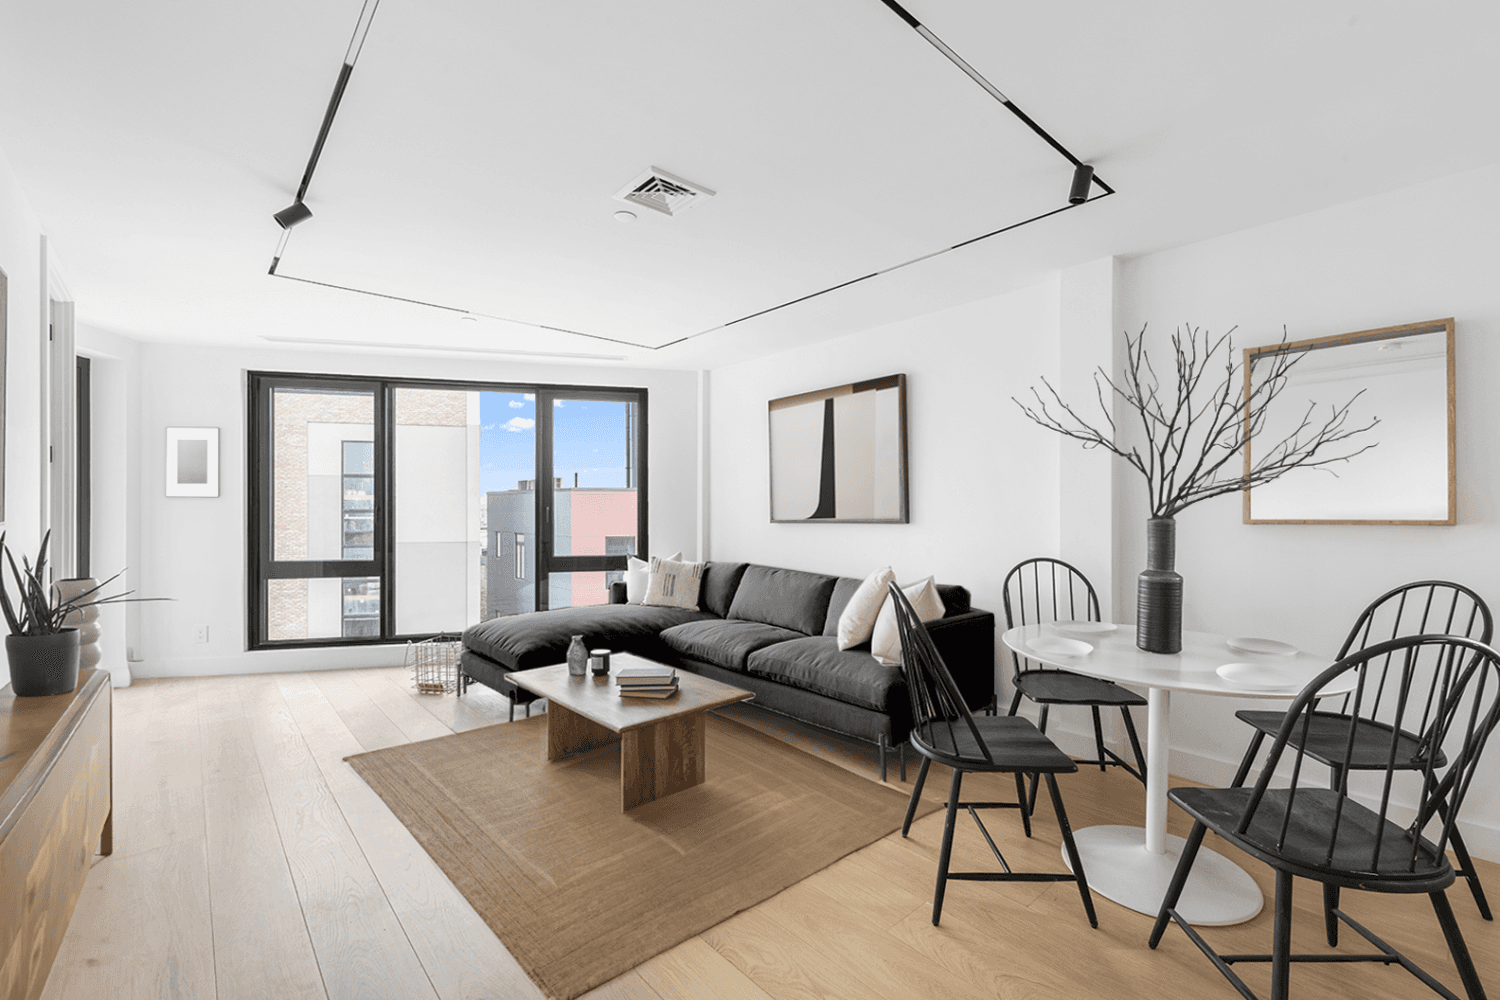 Welcome to 61 N Henry Street, the premier new development condominium at the intersection of Greenpoint and Williamsburg.